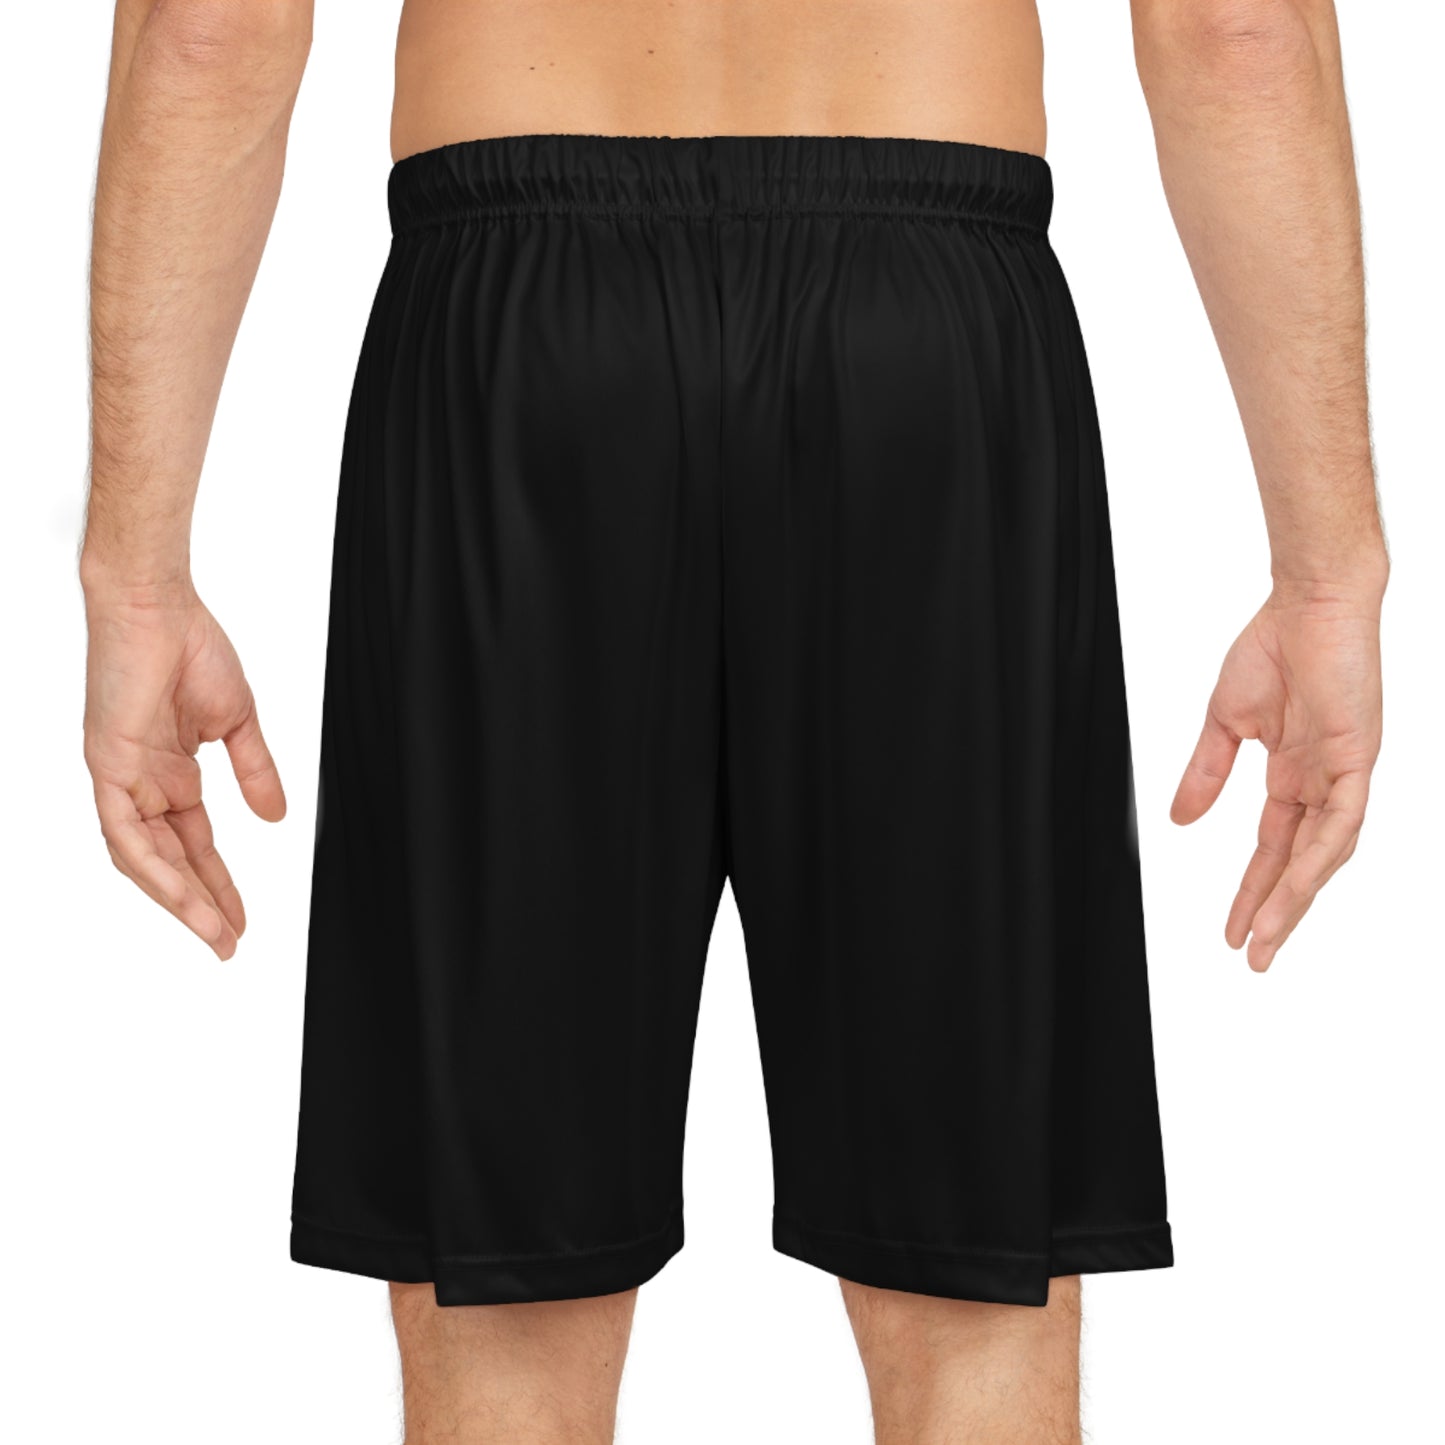 Refs Need Love Too Basketball Shorts for Rec games | Moisture Wicking Shorts | No Pockets | Black shorts only | Referee gifts | Gifts for Refs | For Basketball officials